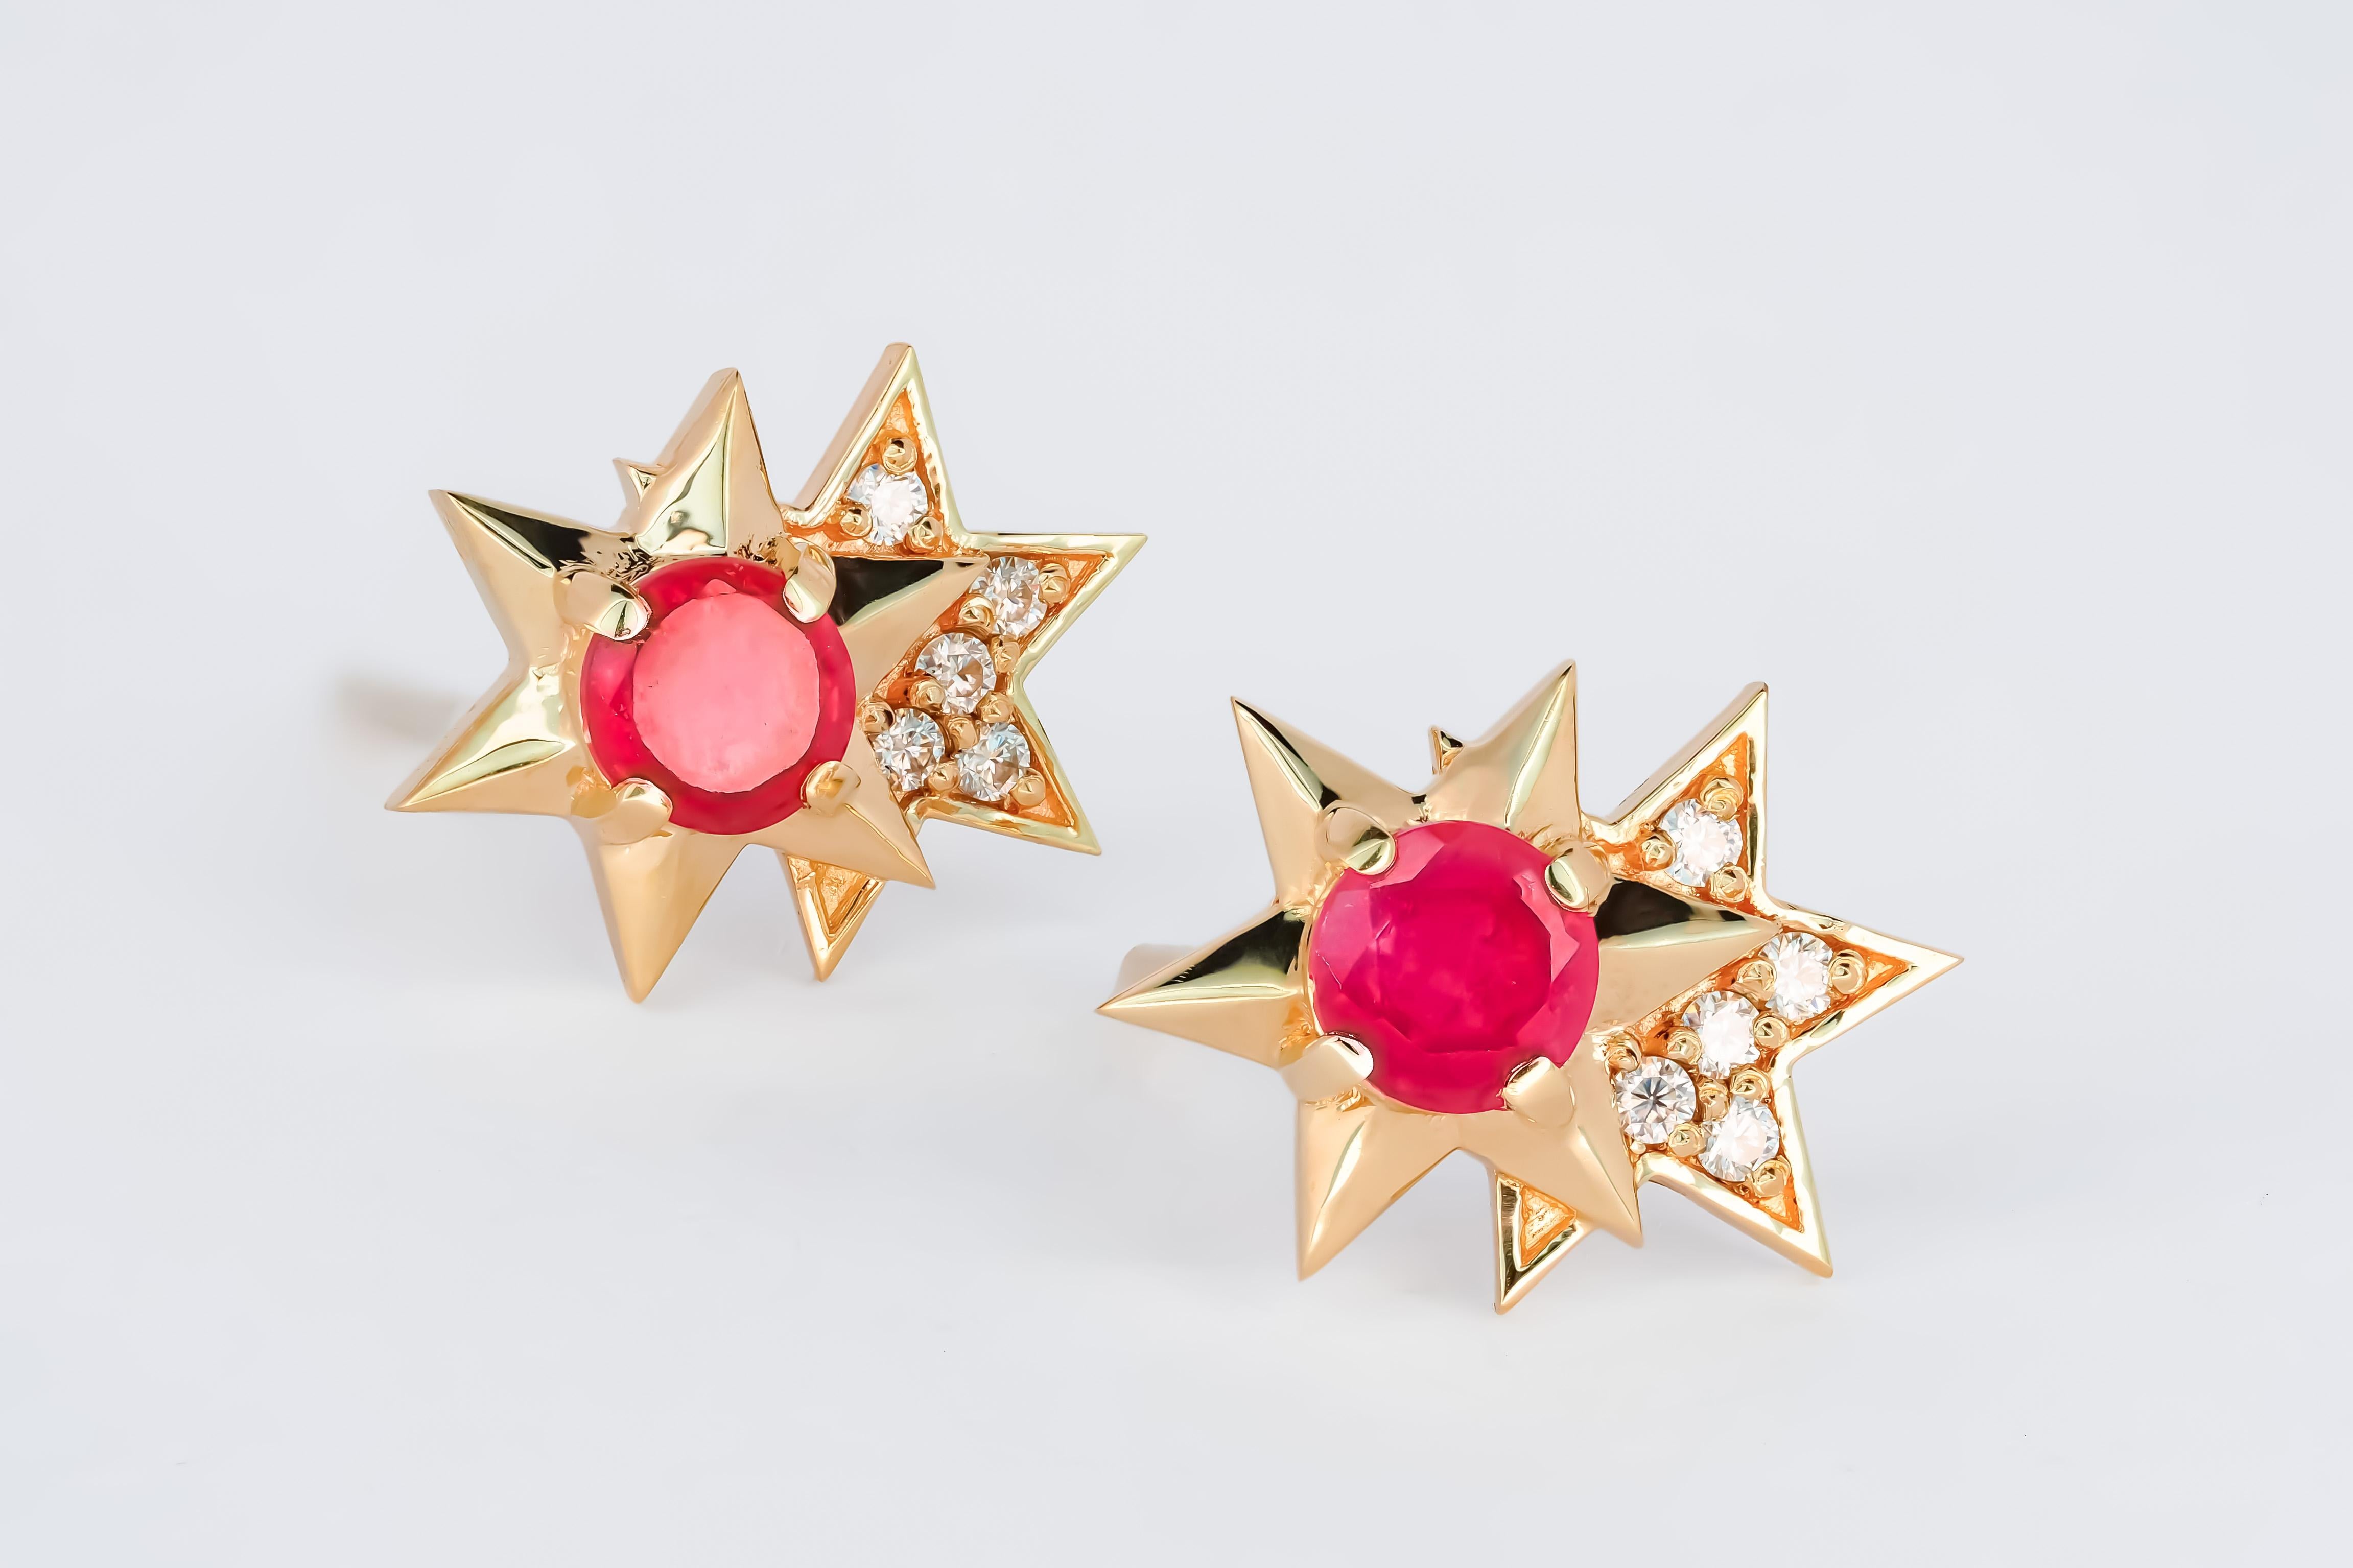 14 Karat Gold Earrings Studs with Rubies and Diamonds. Ruby stud earrings For Sale 1